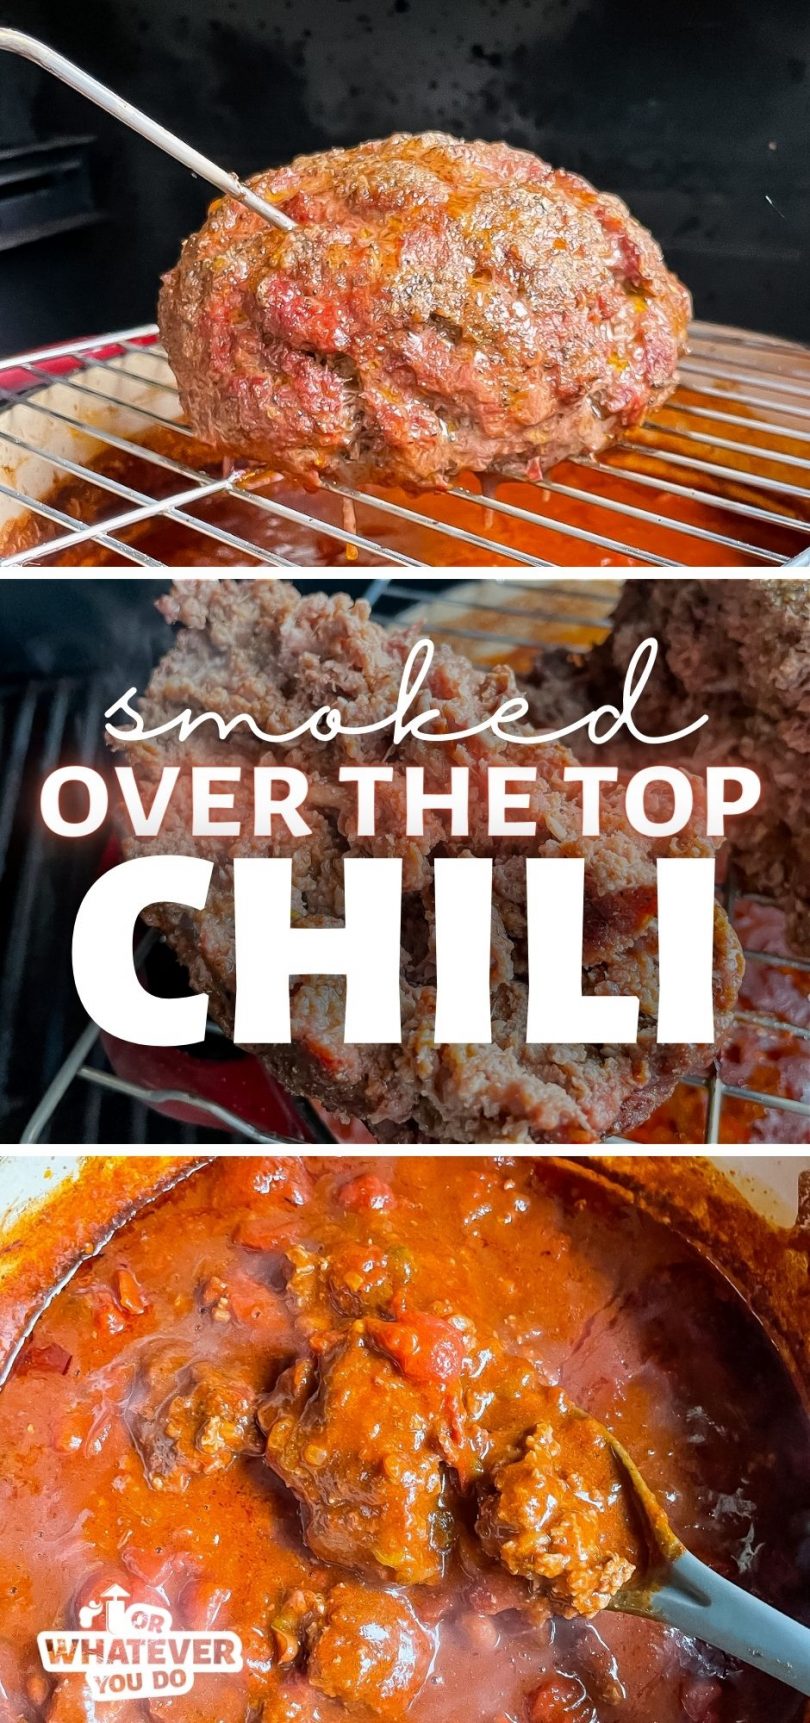 Smoked Over the Top Chili Recipe